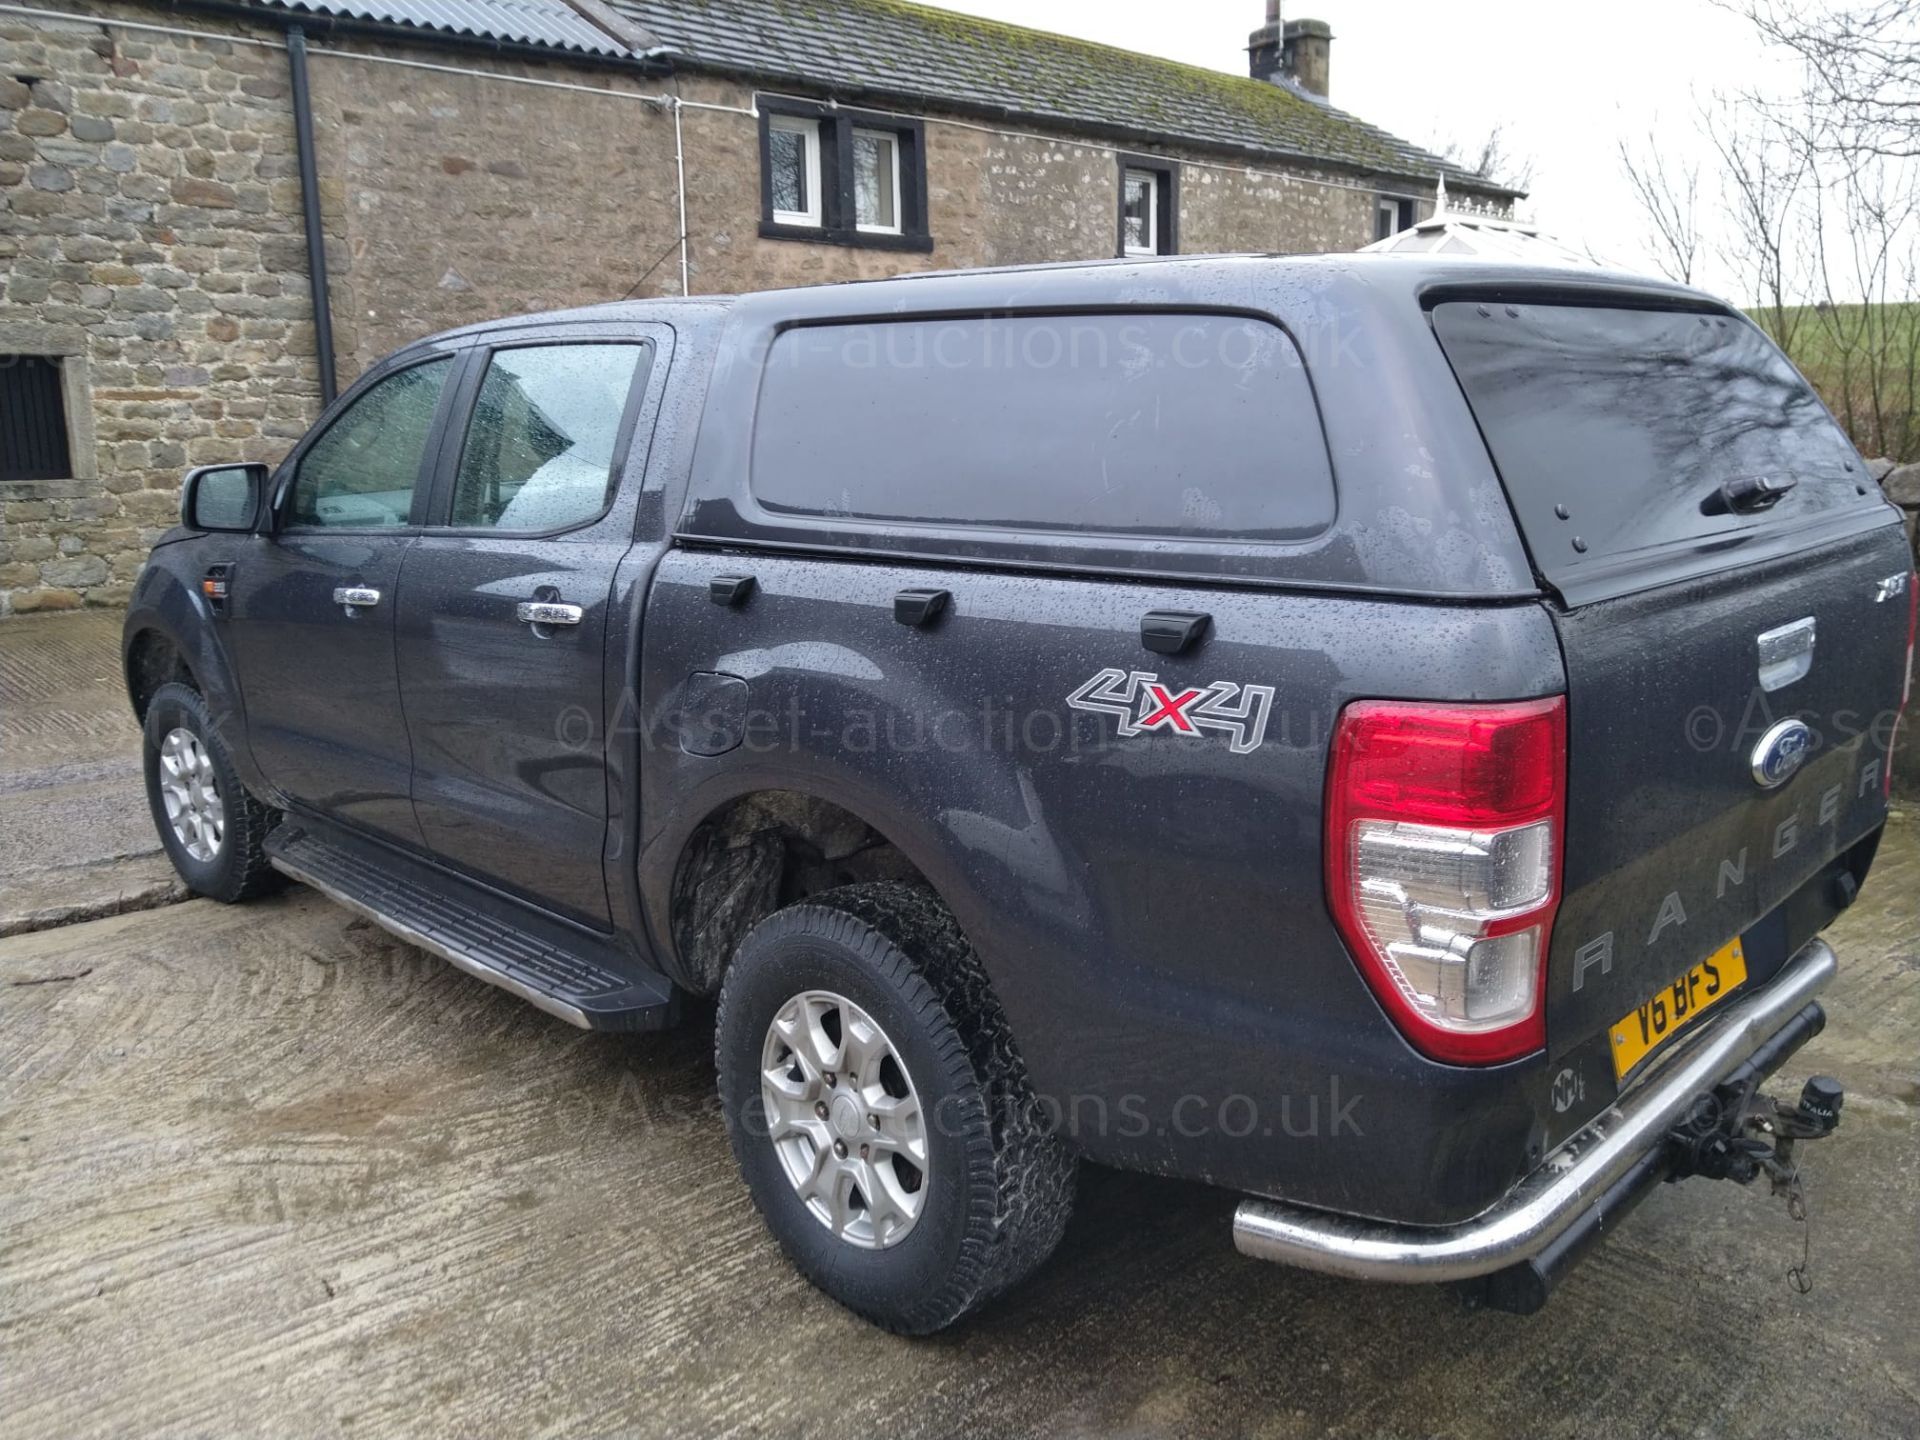 2016 FORD RANGER XLT 4X4 DCB 2.2 TDCI DOUBLE CAB PICK UP, 94K, CANOPY AND SIDE STEPS NOW FITTED - Image 2 of 15